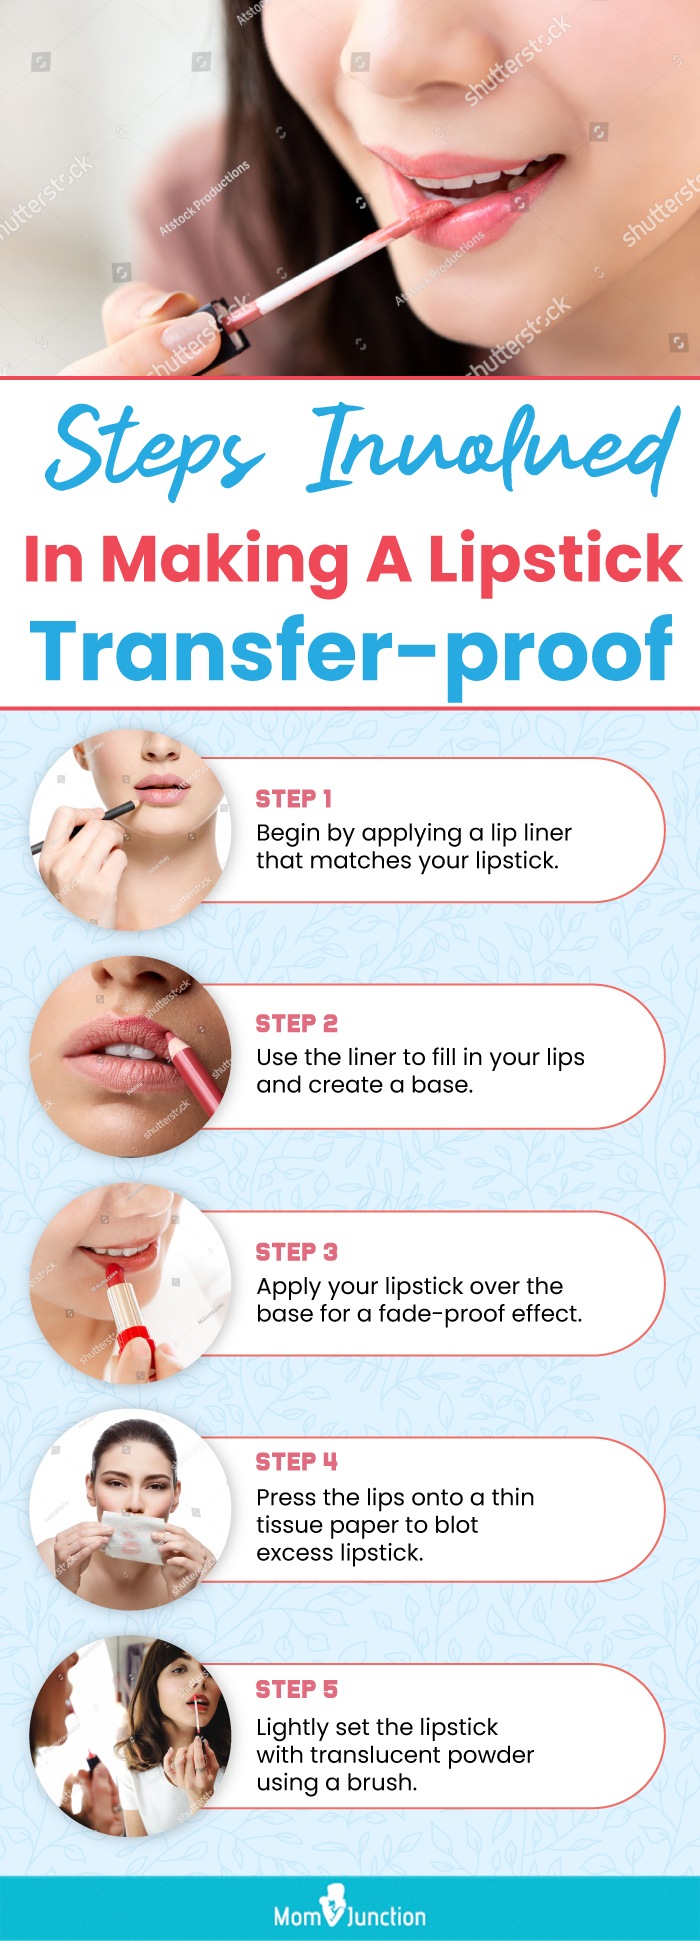 Steps Involved In Making A Lipstick Transfer proof(infographic)